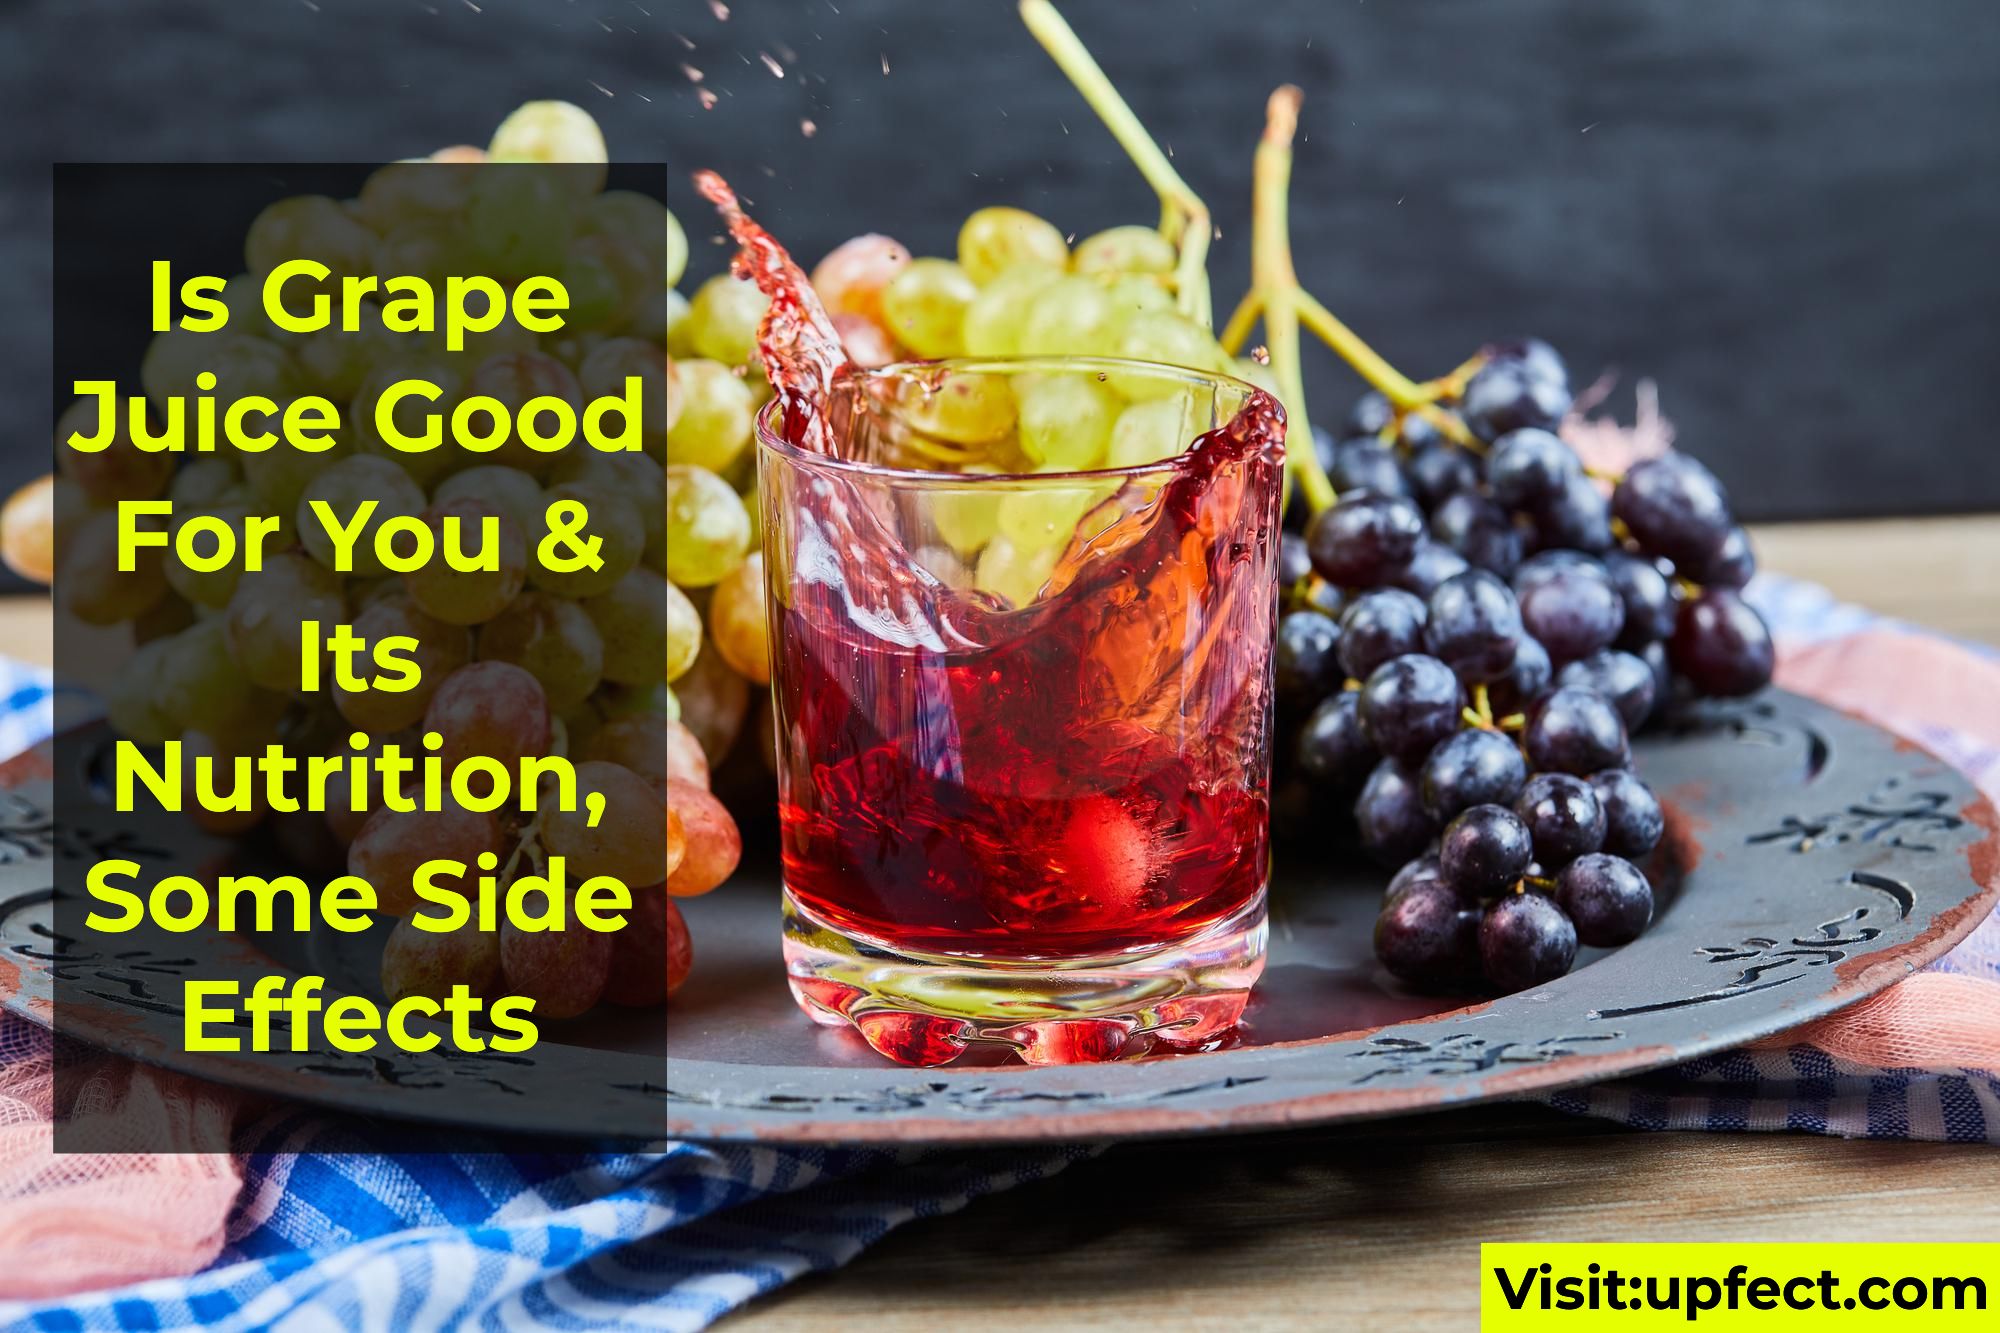 Is Grape Juice Good For You & Its Nutrition, Some Side Effects